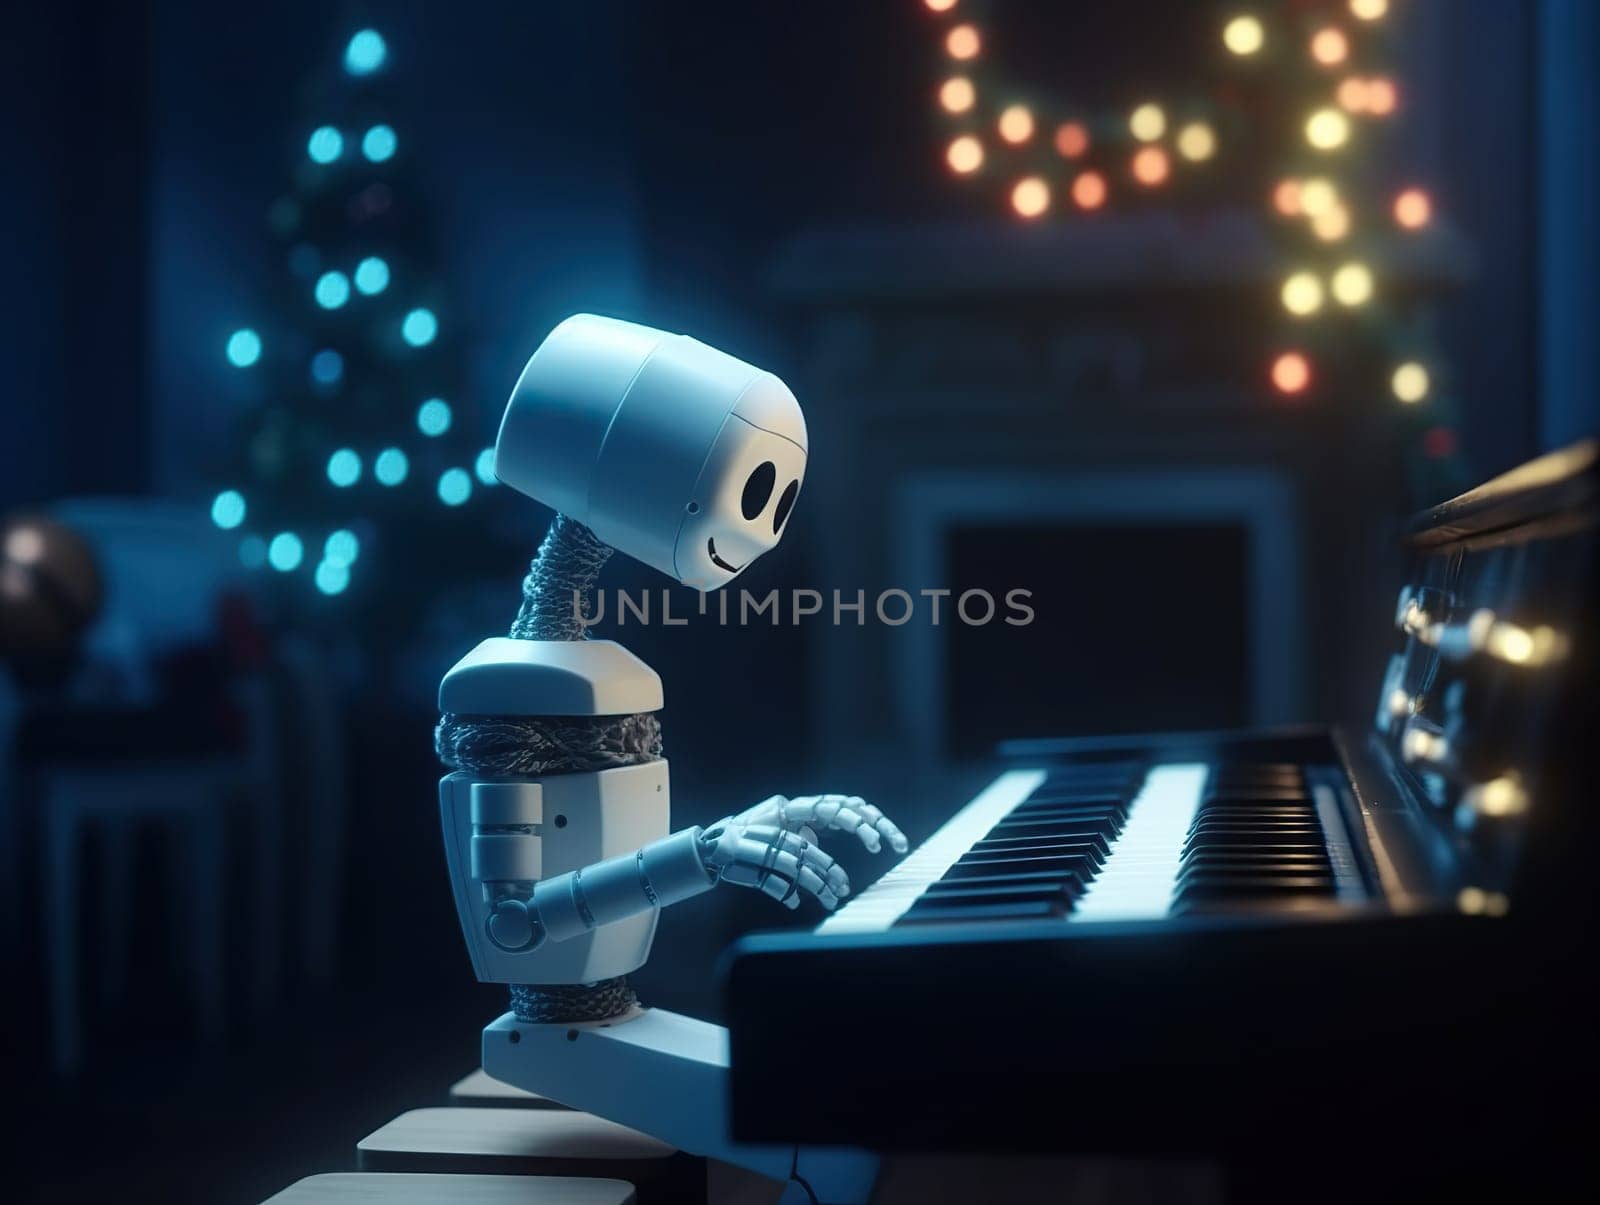 Old-Fashioned Humanoid Robot Playing The Piano